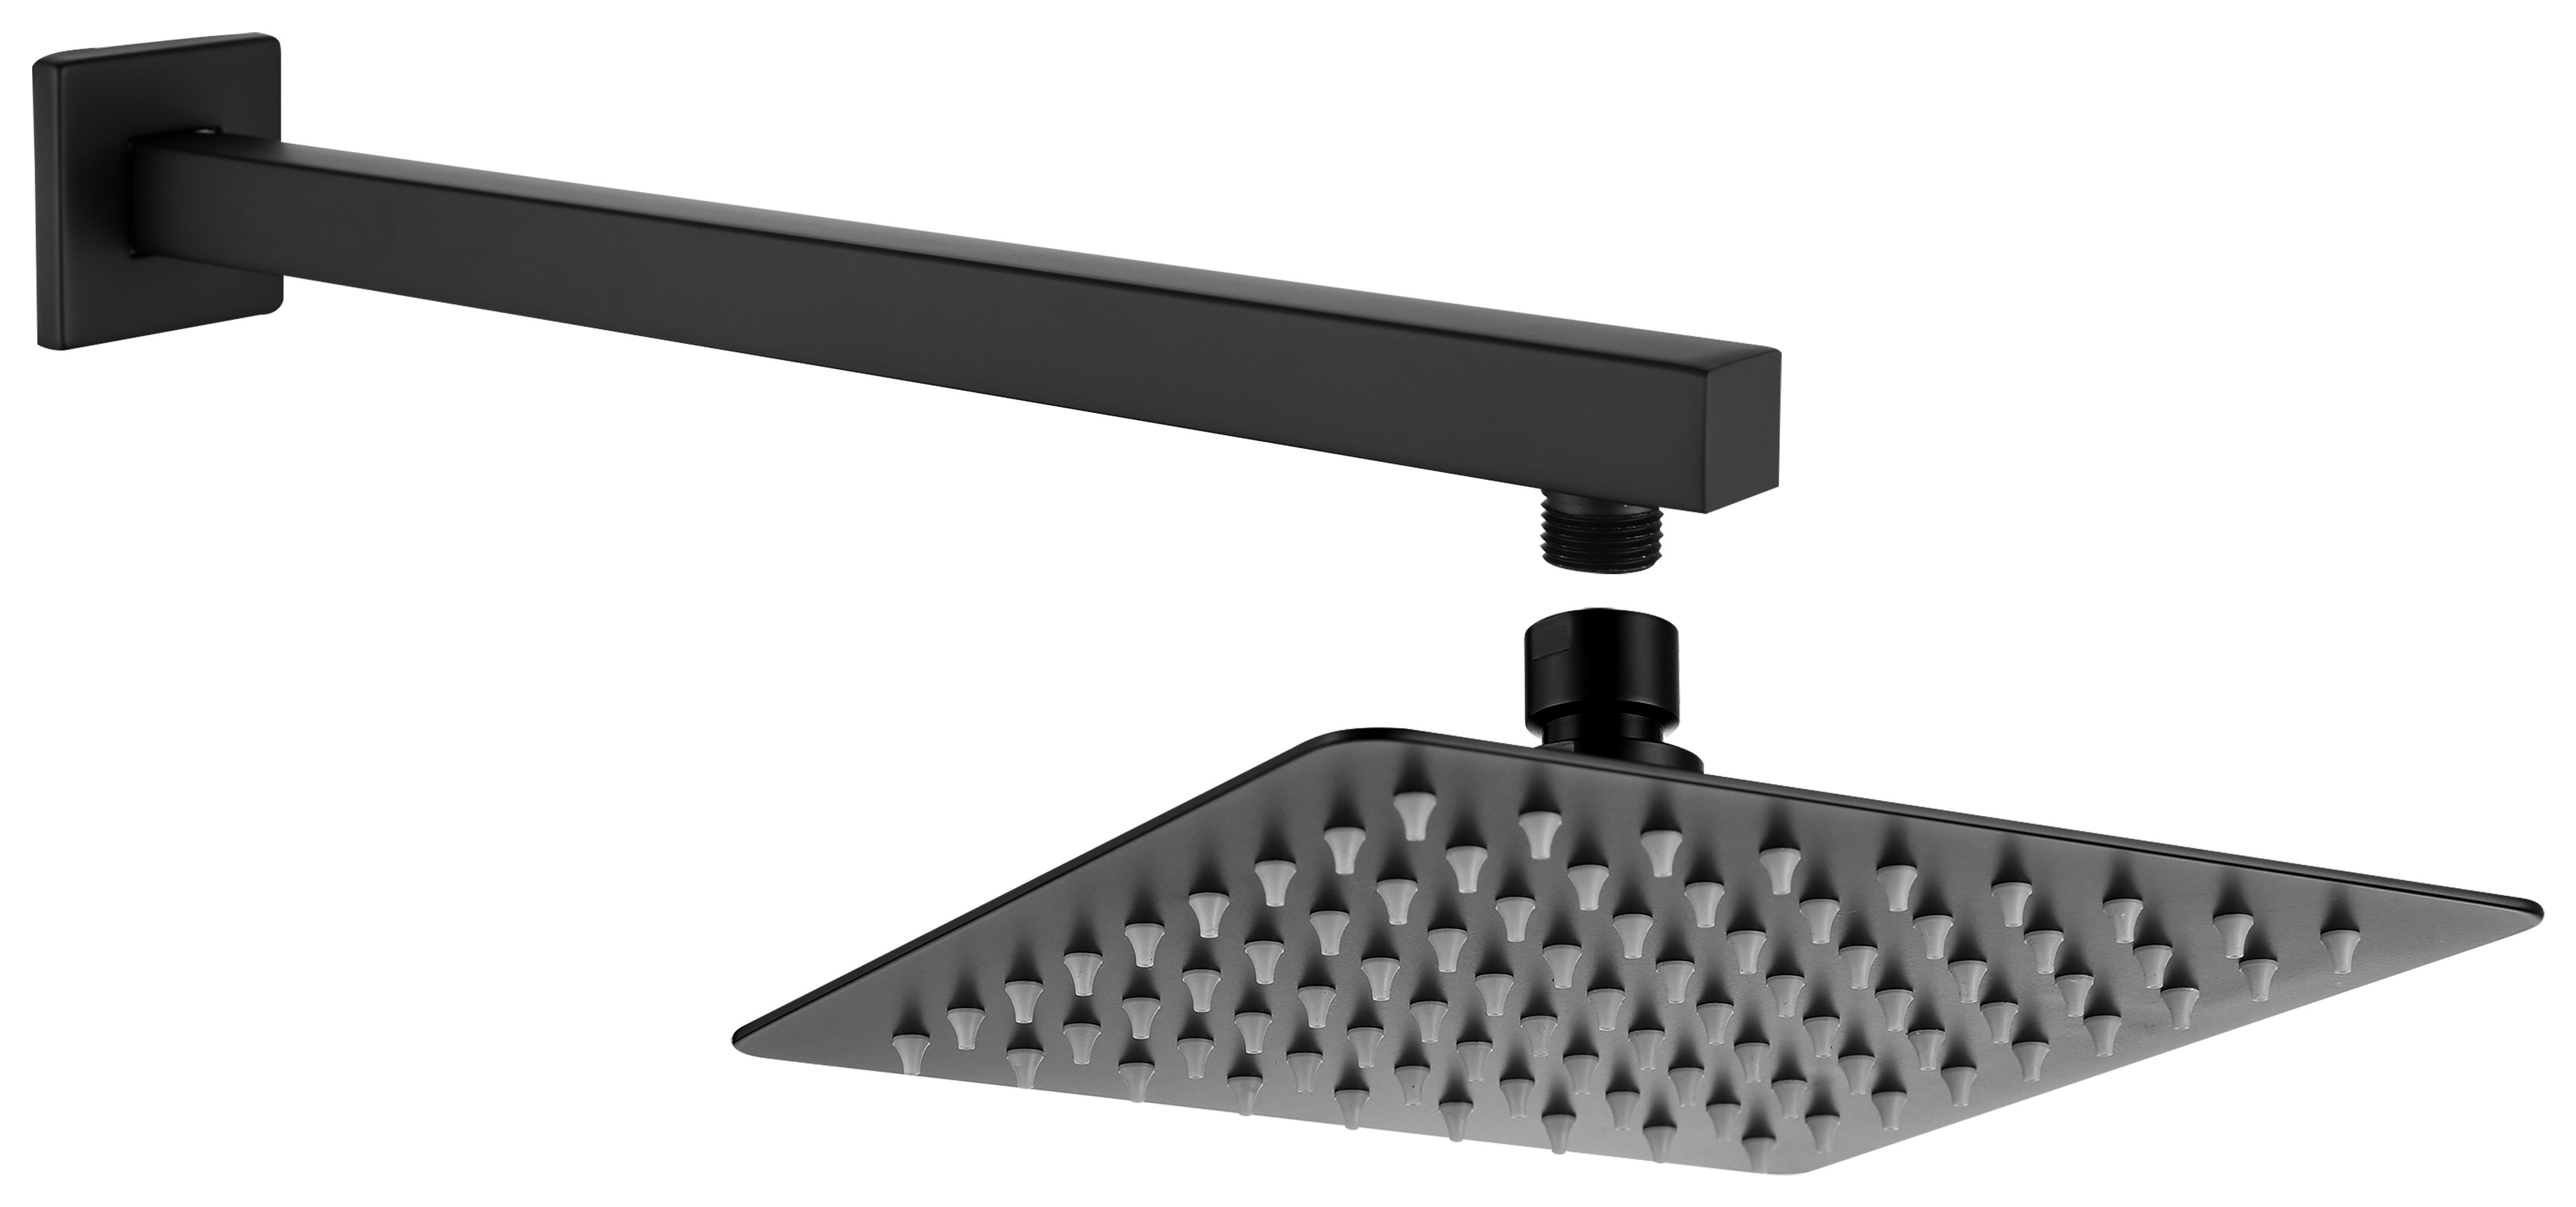 Image of Bristan Black Wall Mounted Square Shower Head & Arm